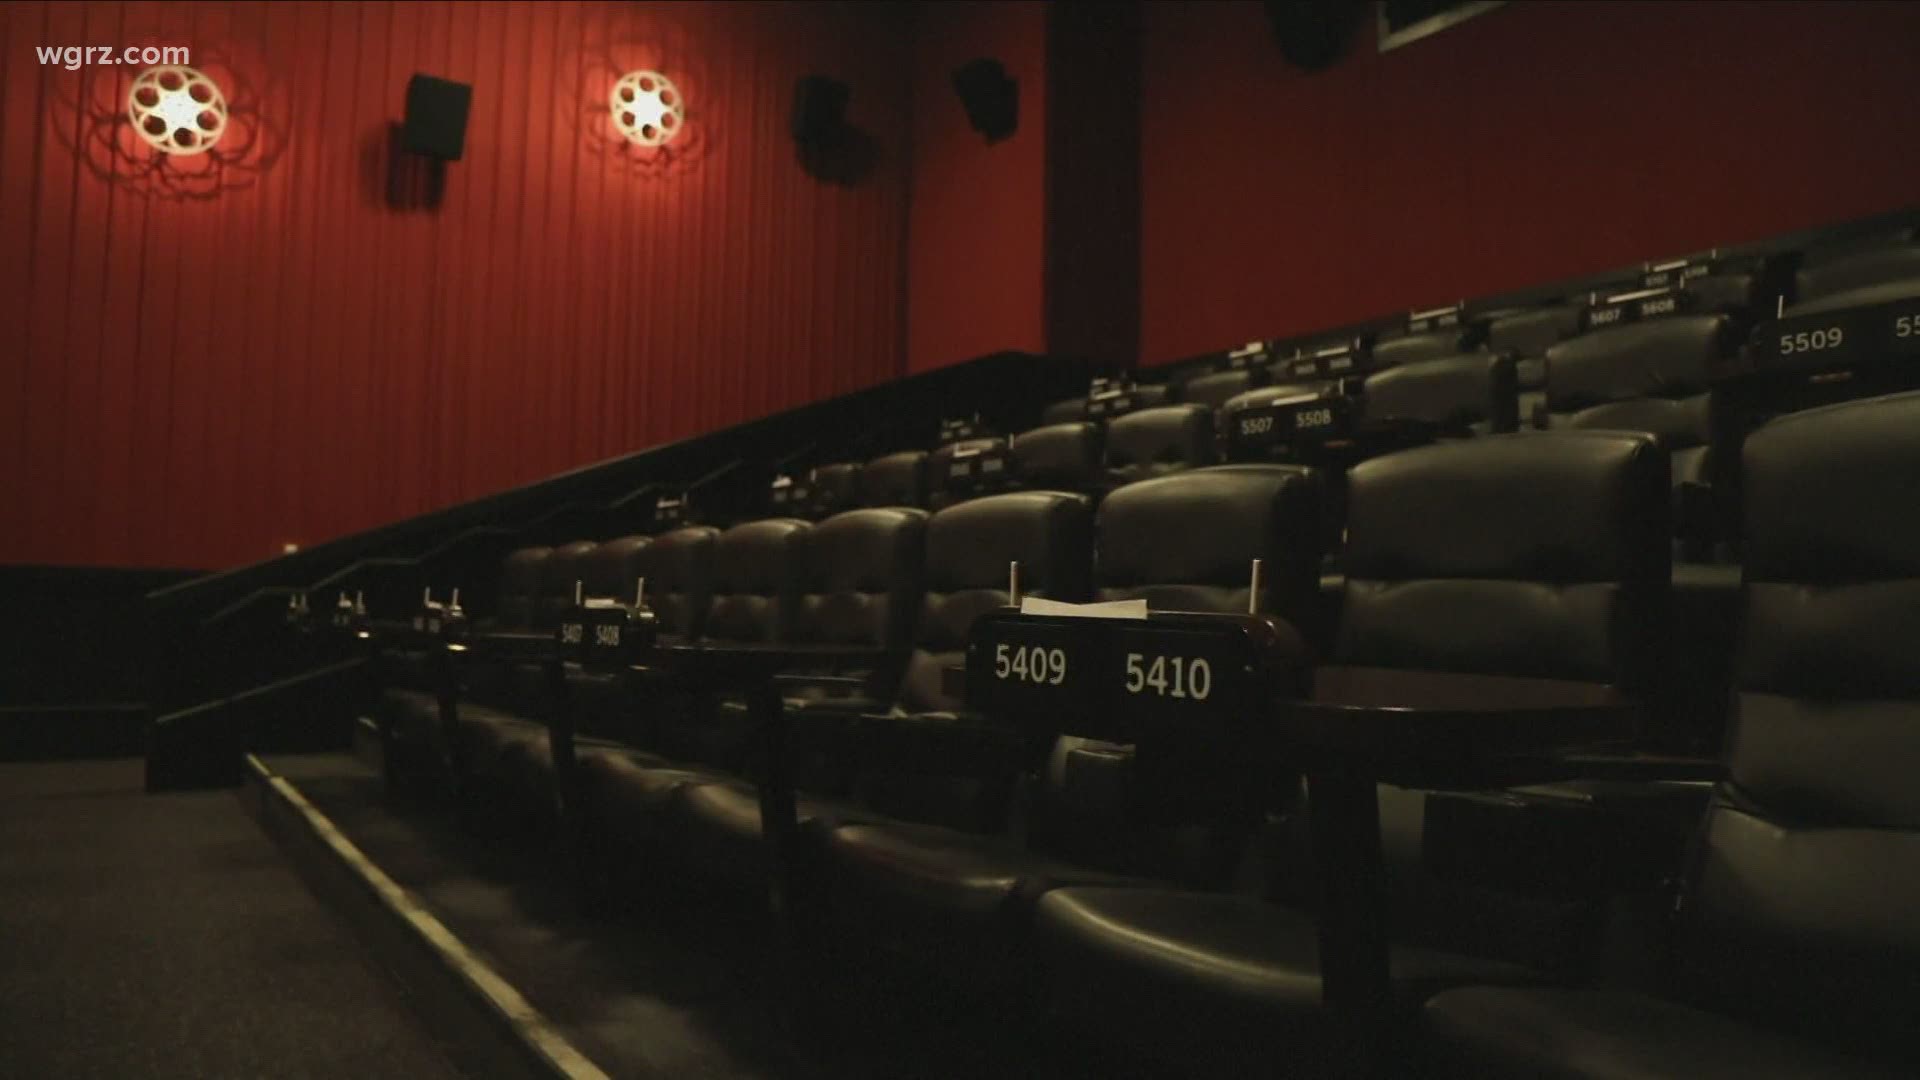 Regal temporarily closes all theaters